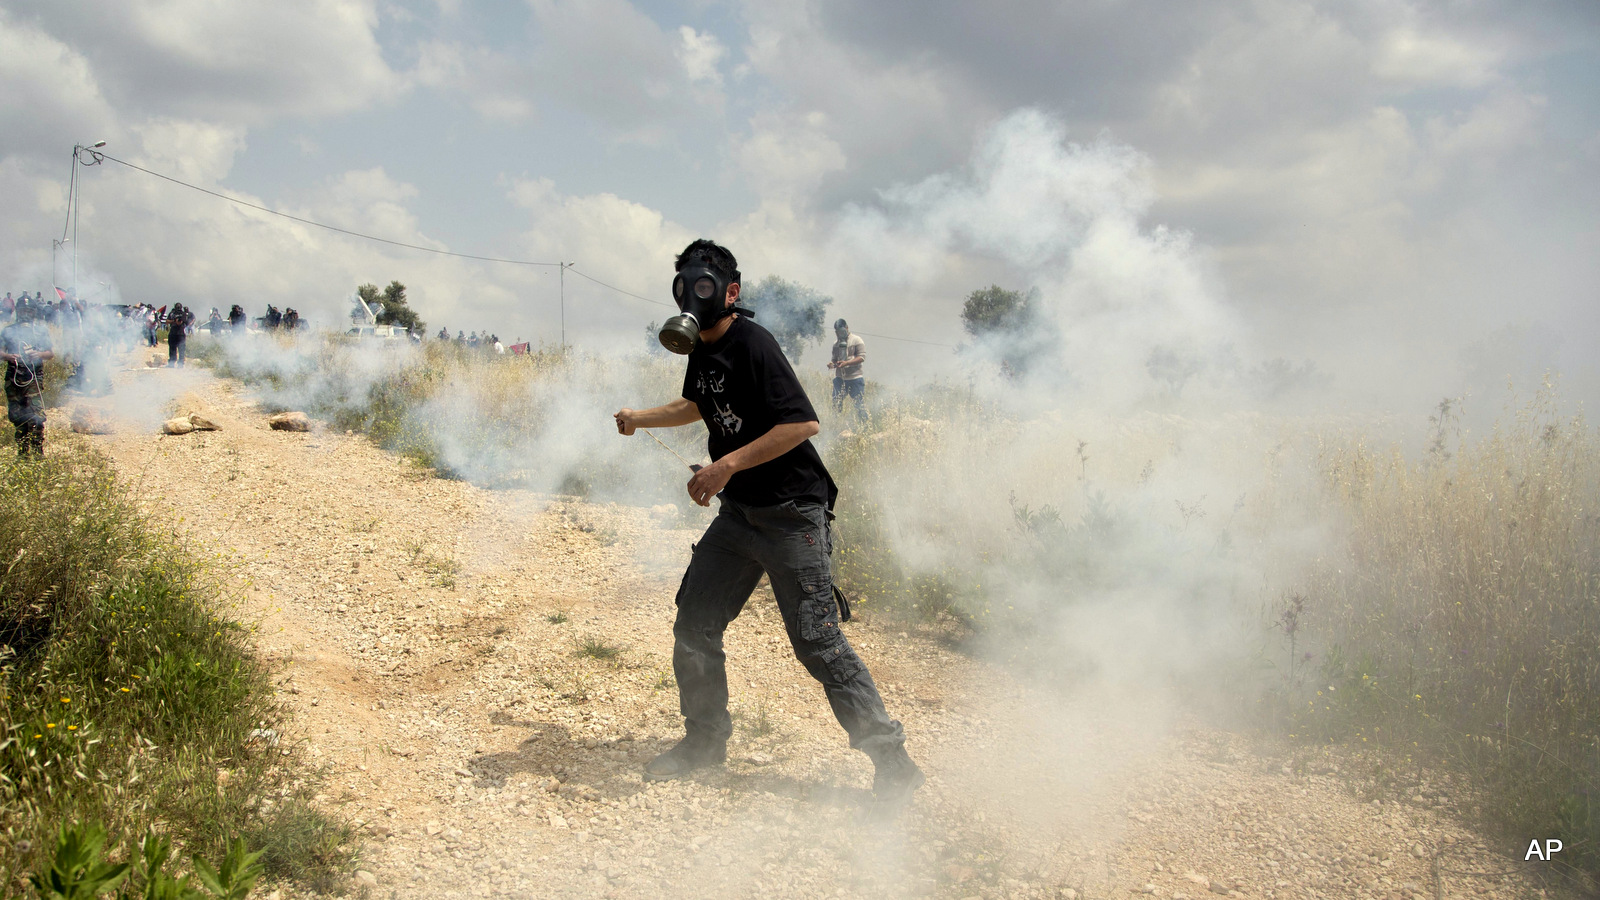 A Palestinian demonstrator uses a sling to throw back a tear gas canister fired by Israeli soldiers during clashes following a protest marking Palestinian "Prisoners' Day" in the West Bank village of Bilin, near Ramallah, Friday, April 17, 2015.